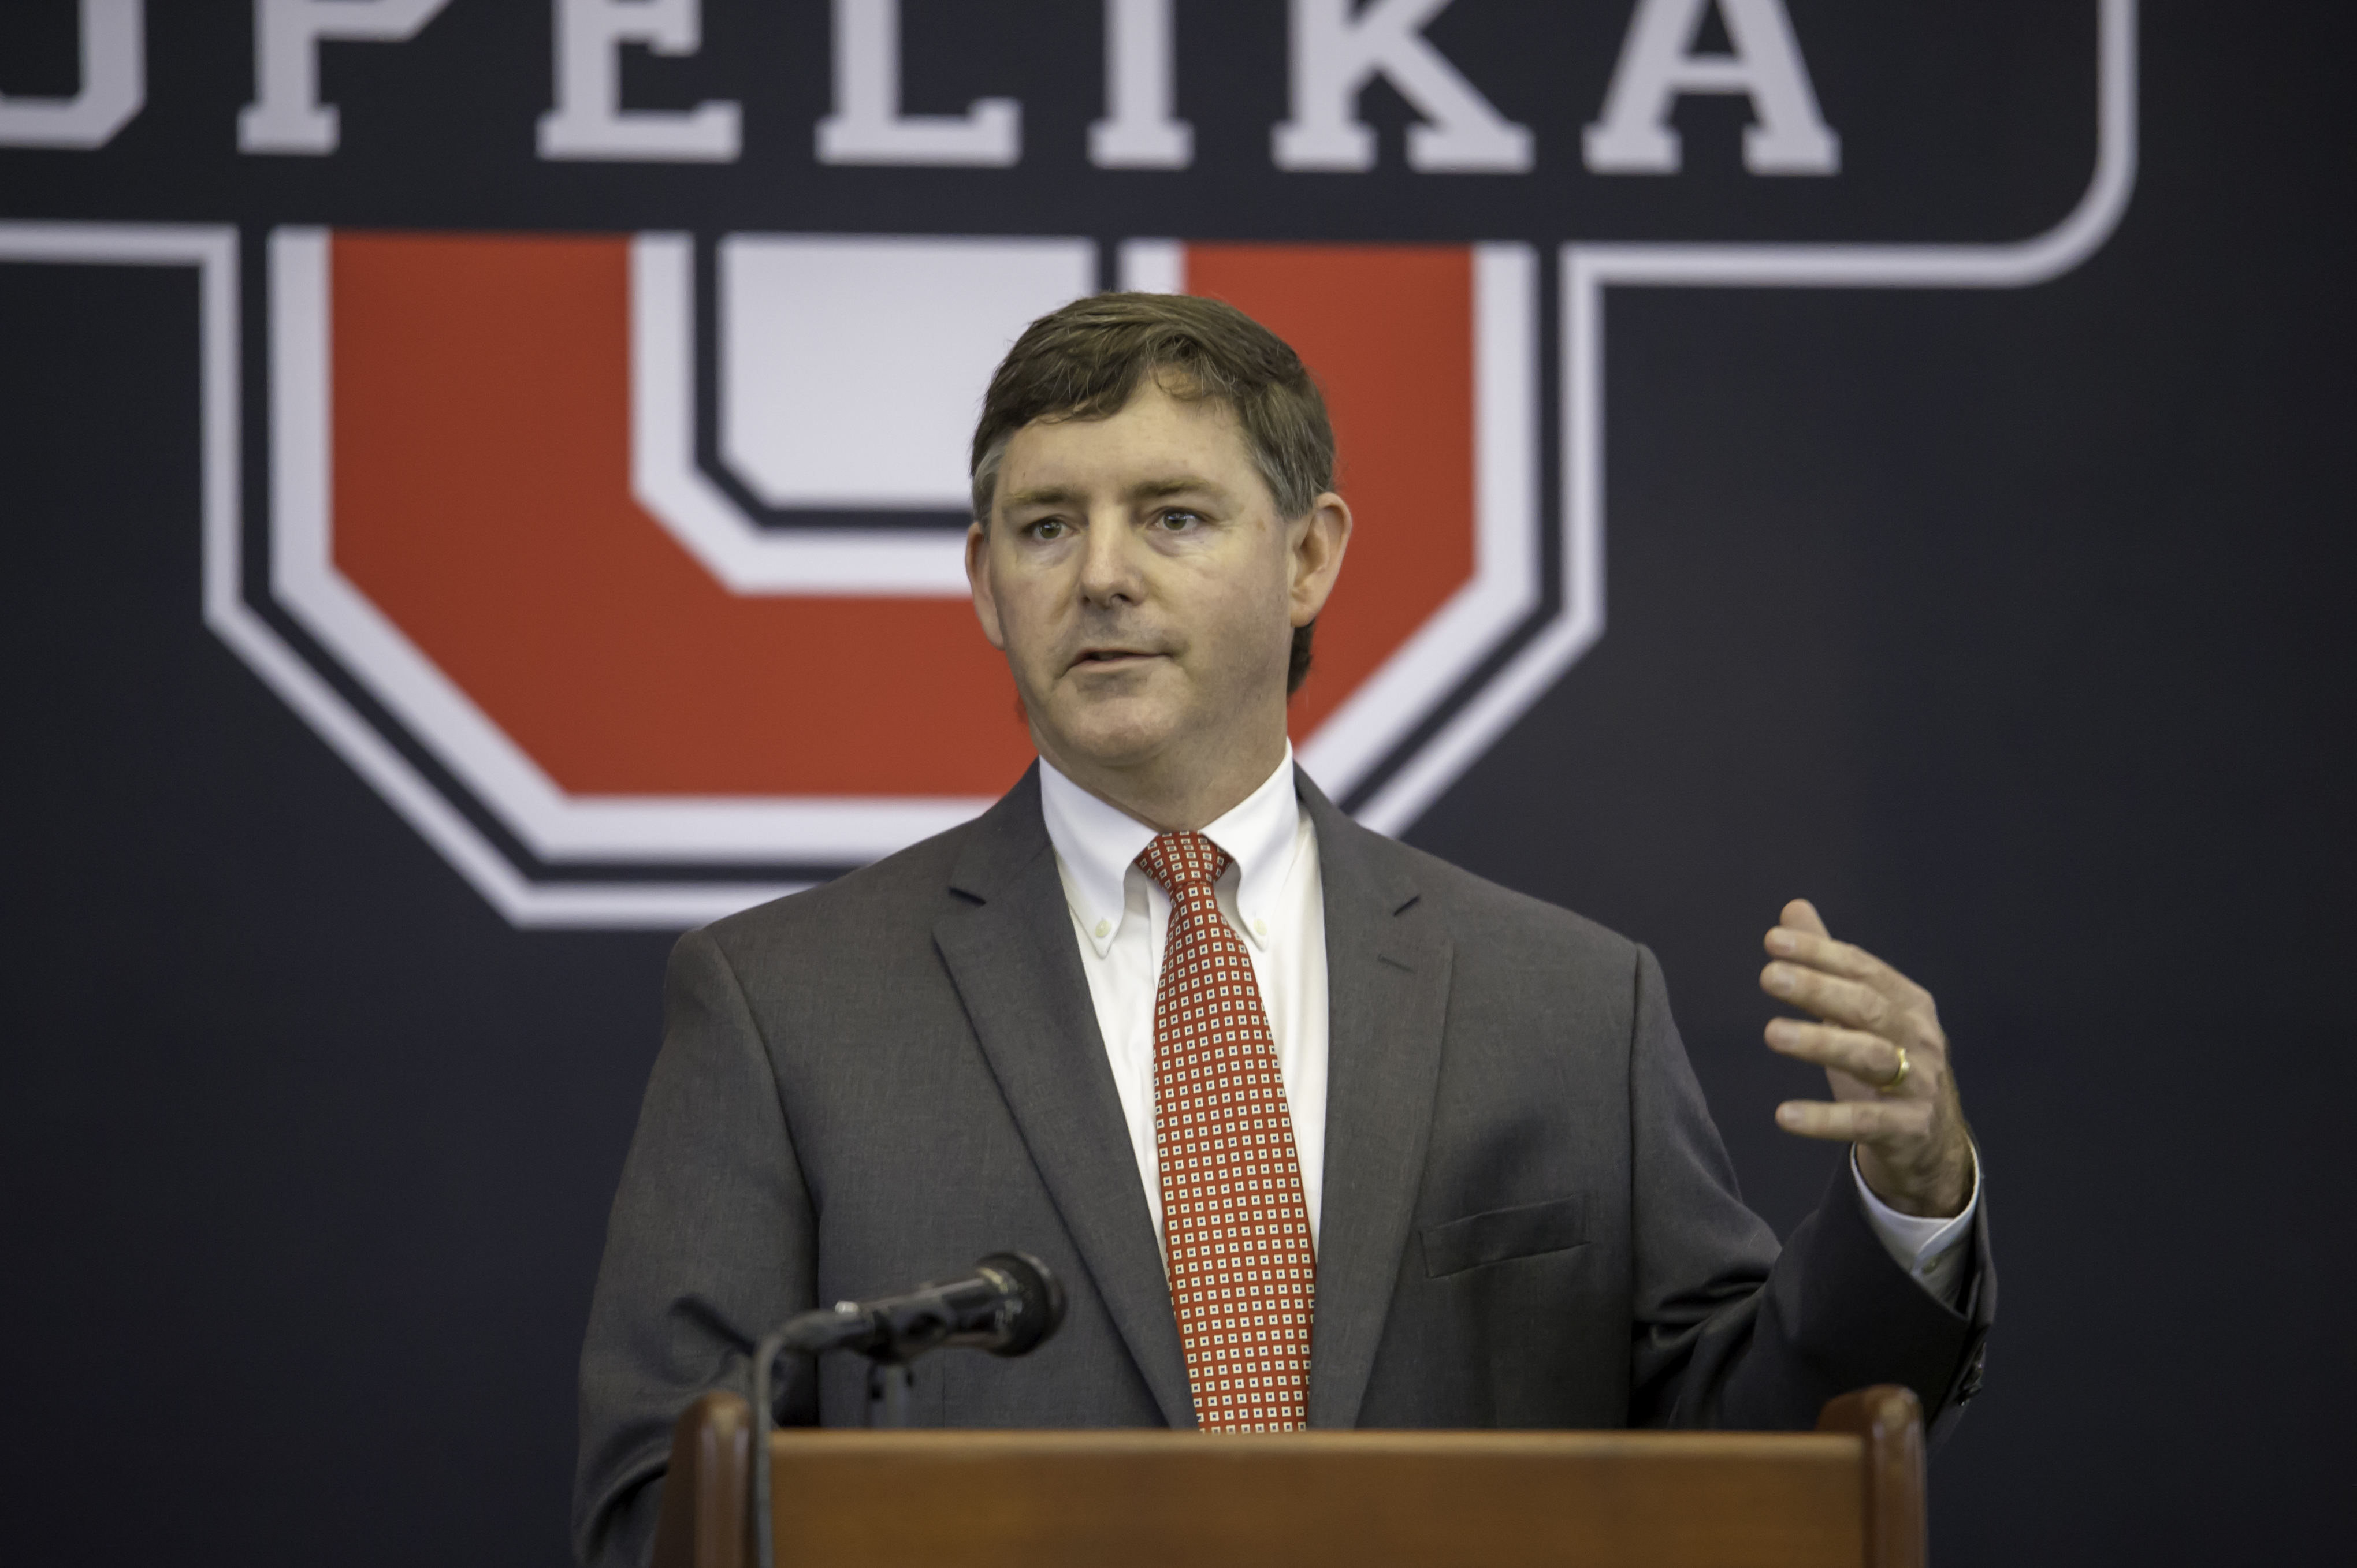 Opelika High School’s Erik Speakman will be the featured speaker at the Women’s Business Council on Jan. 29